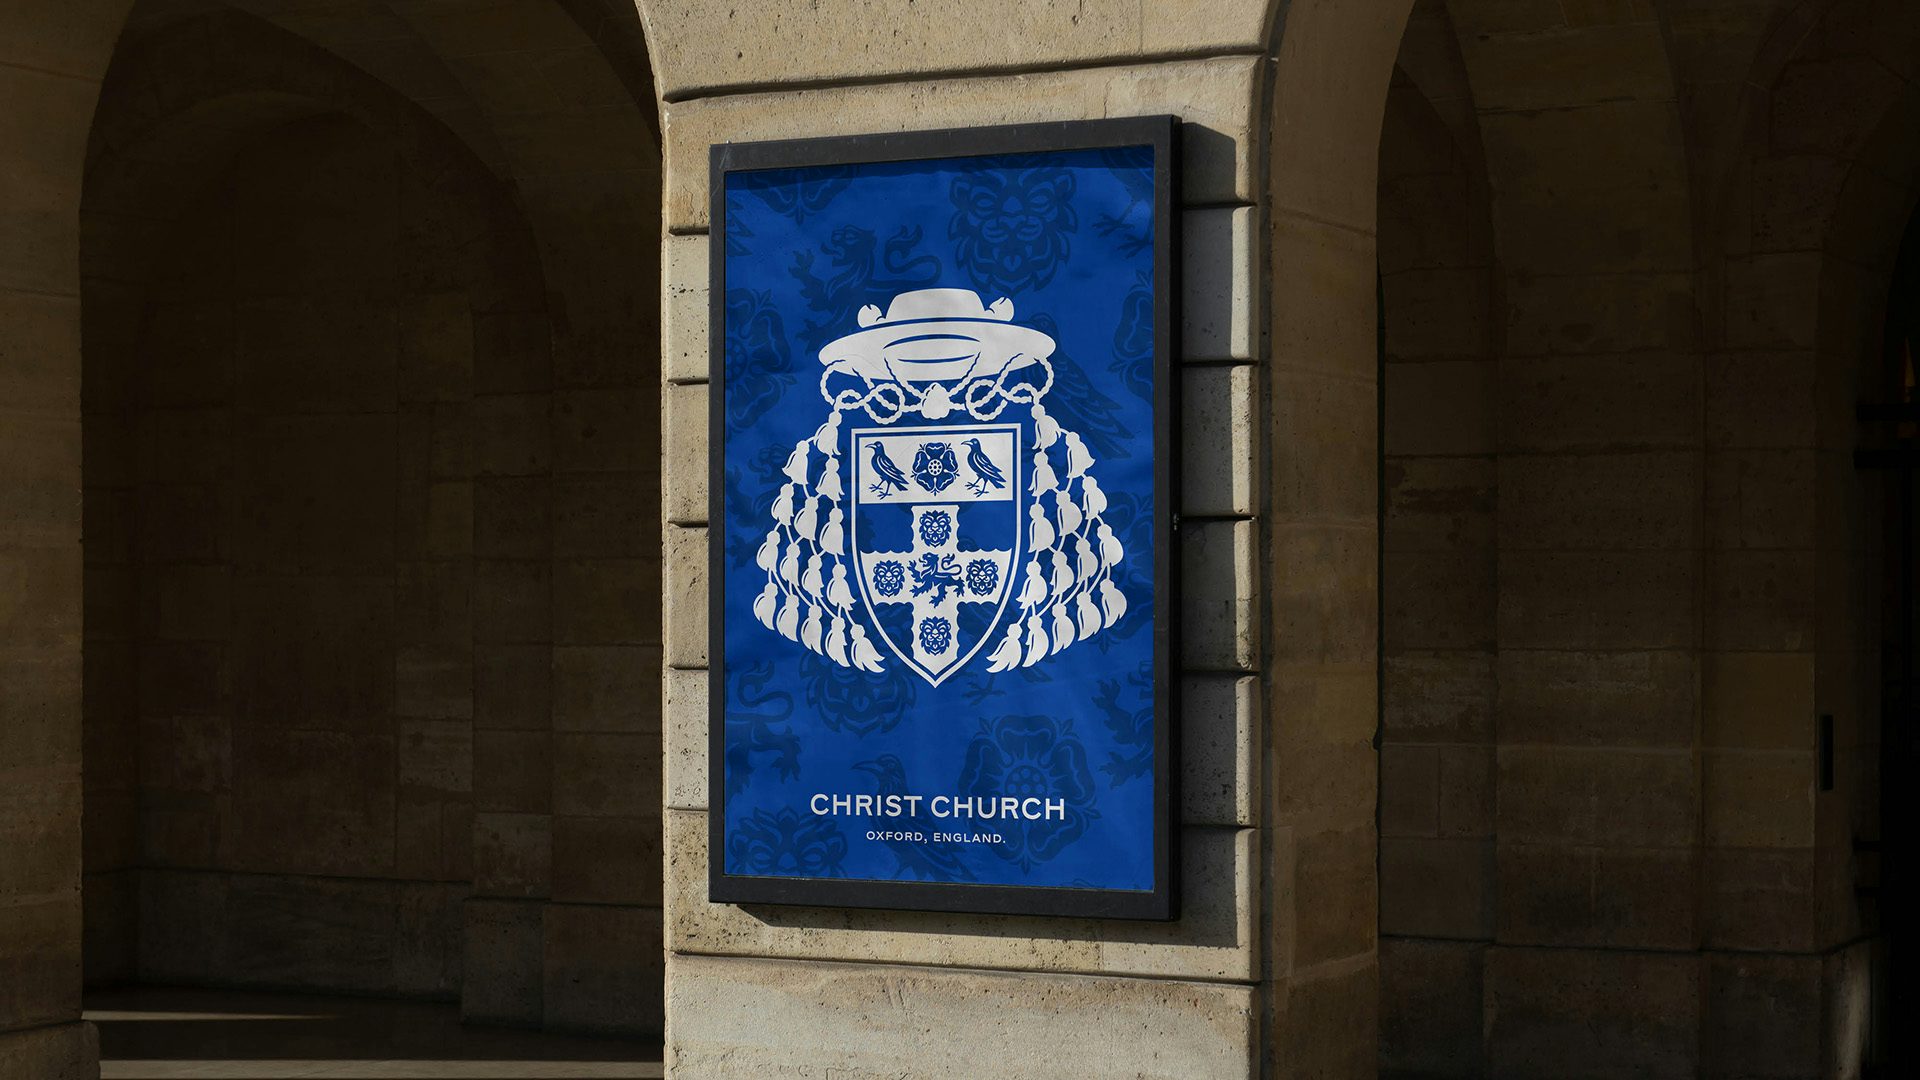 Photo of an example of Christ Church Oxford's branding featuring a crest based on a shield, tassels, and a hat